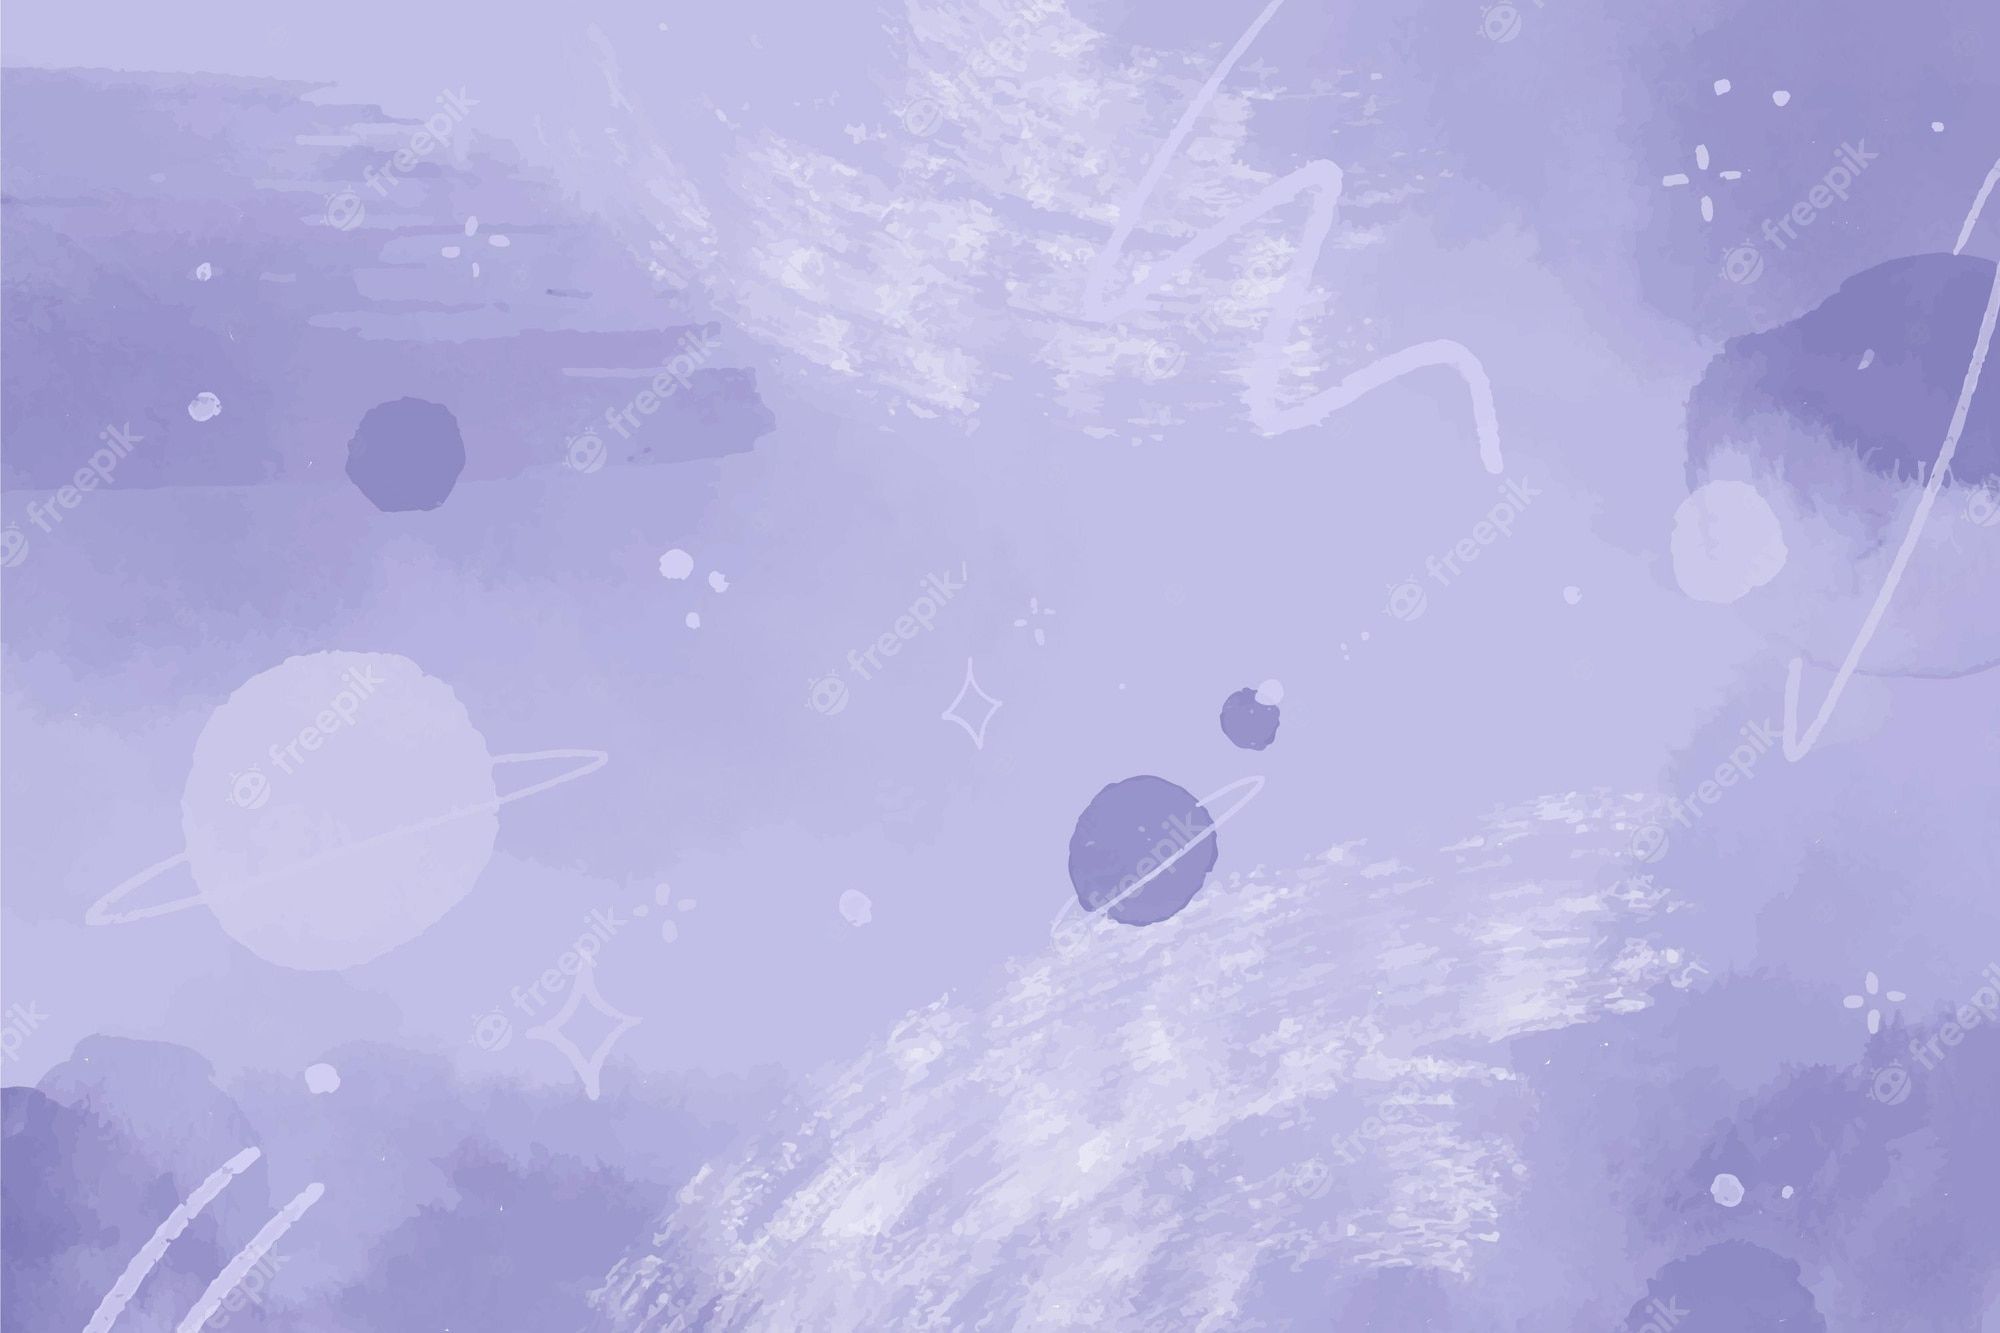 A watercolor style background with planets - Watercolor, violet, hand drawn